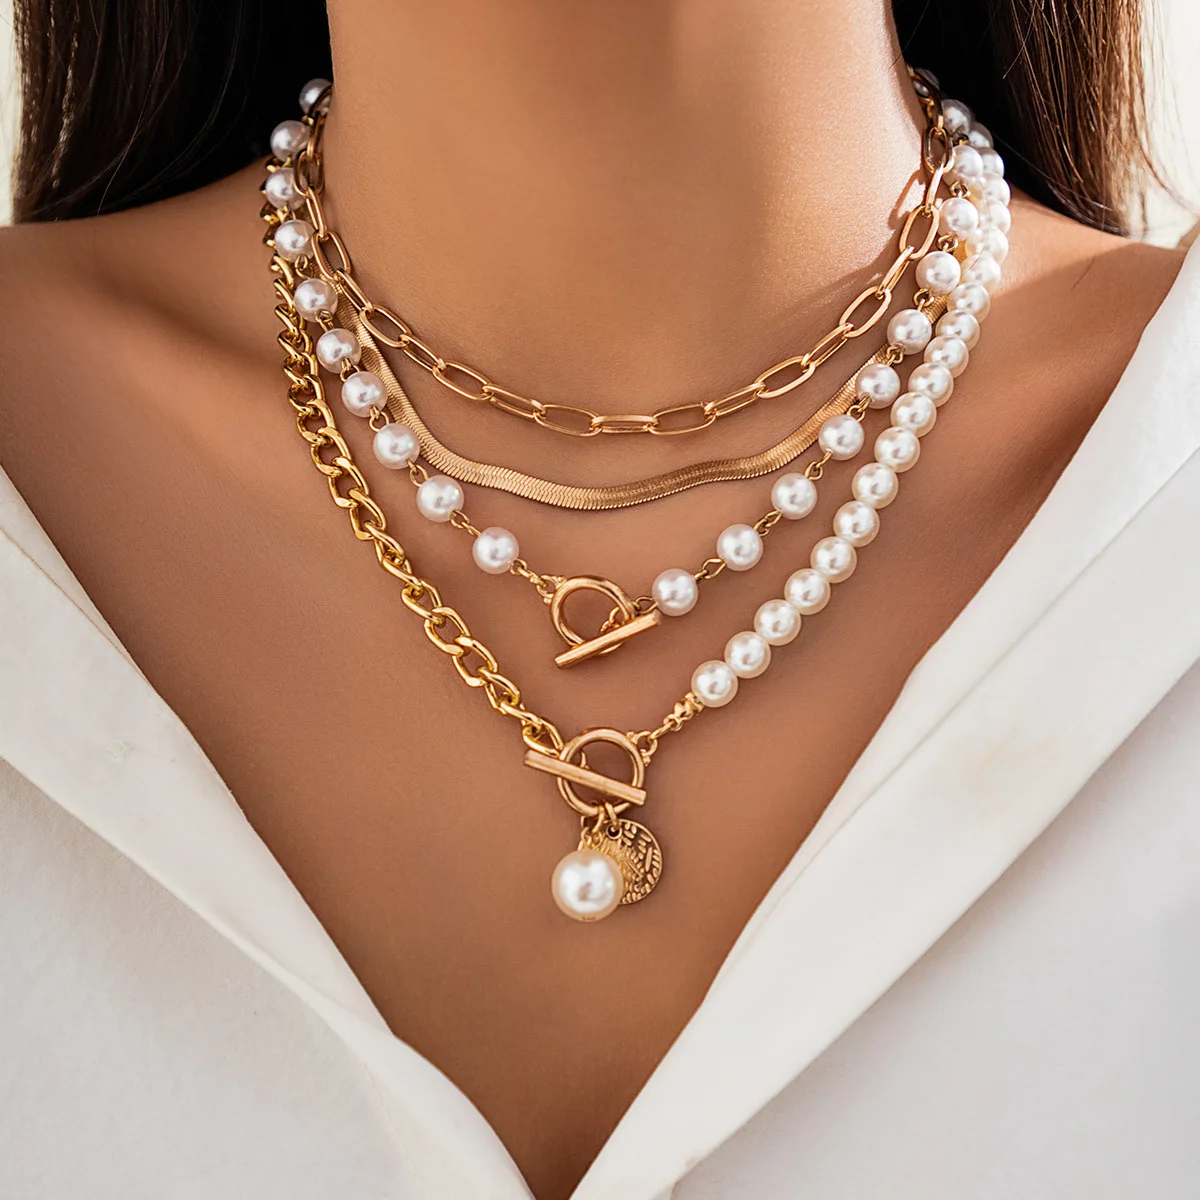 3pcs/set Temperament Baroque shaped pearl necklace Creative irregular chain collarbone collar jewelry for women